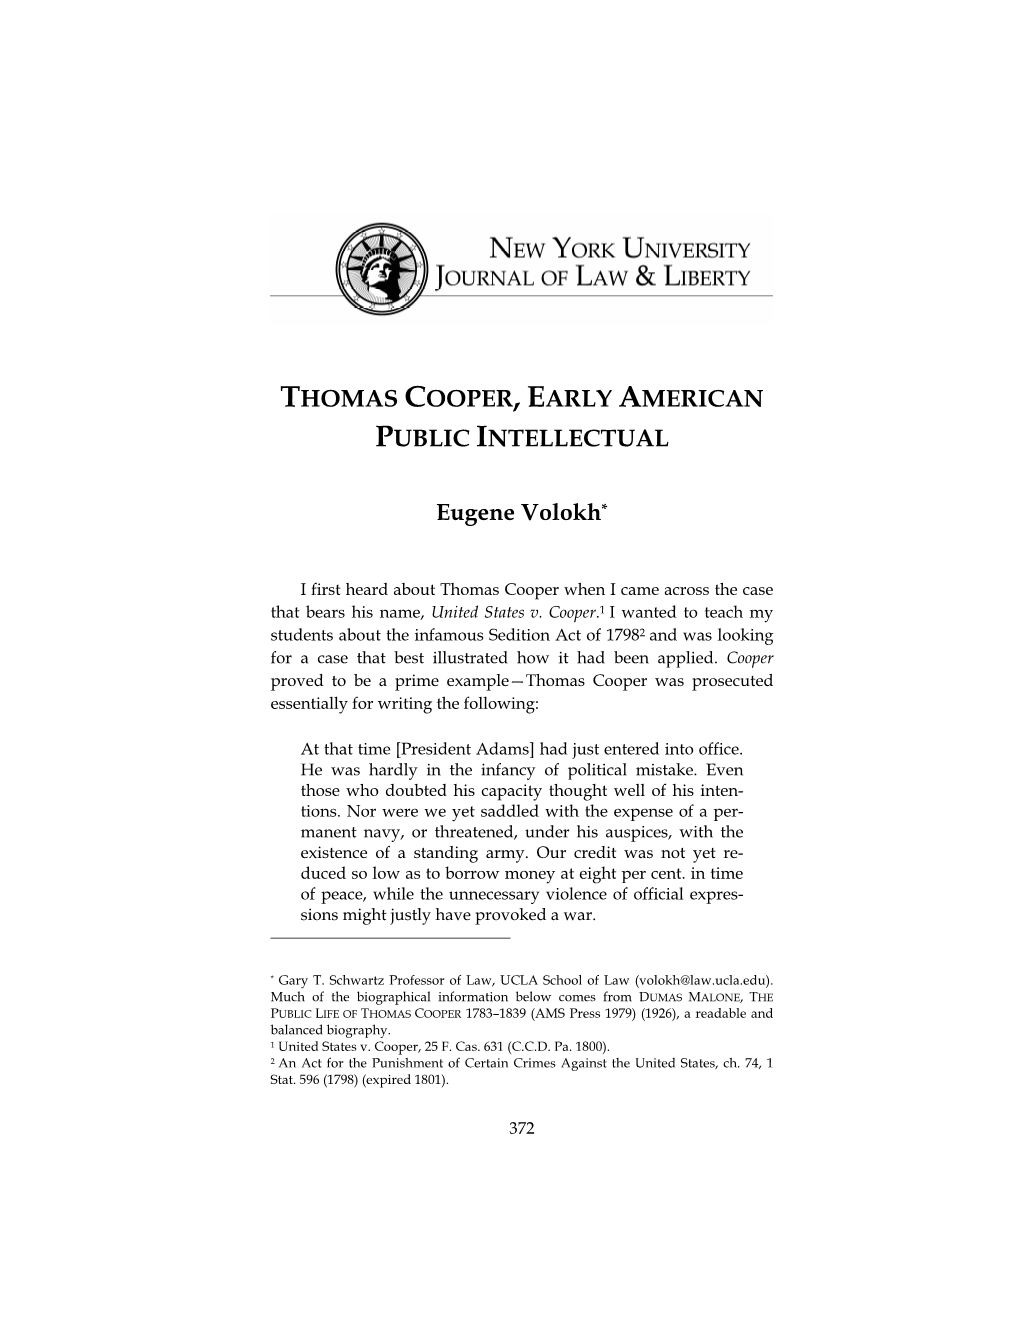 Thomas Cooper, Early American Public Intellectual